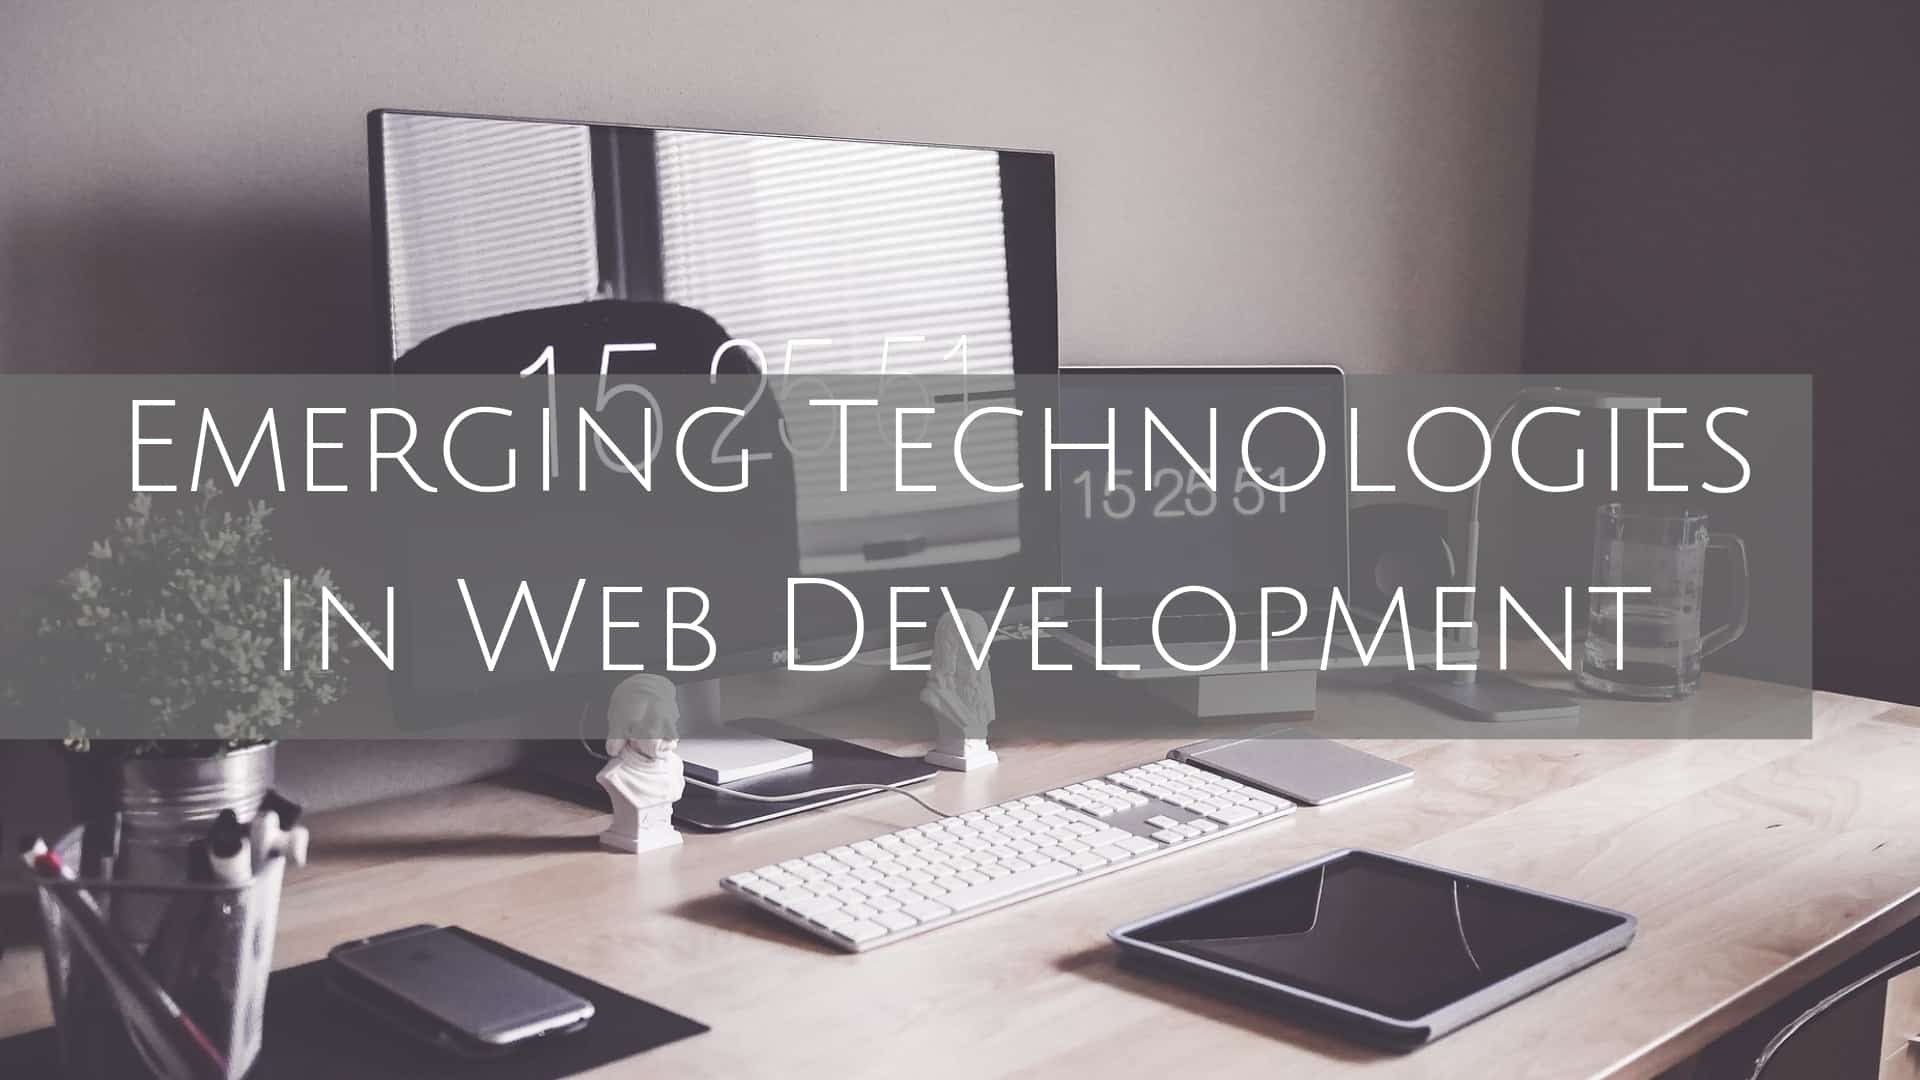 Emerging Technologies In Web Development - Things To Put On Your Desk - HD Wallpaper 